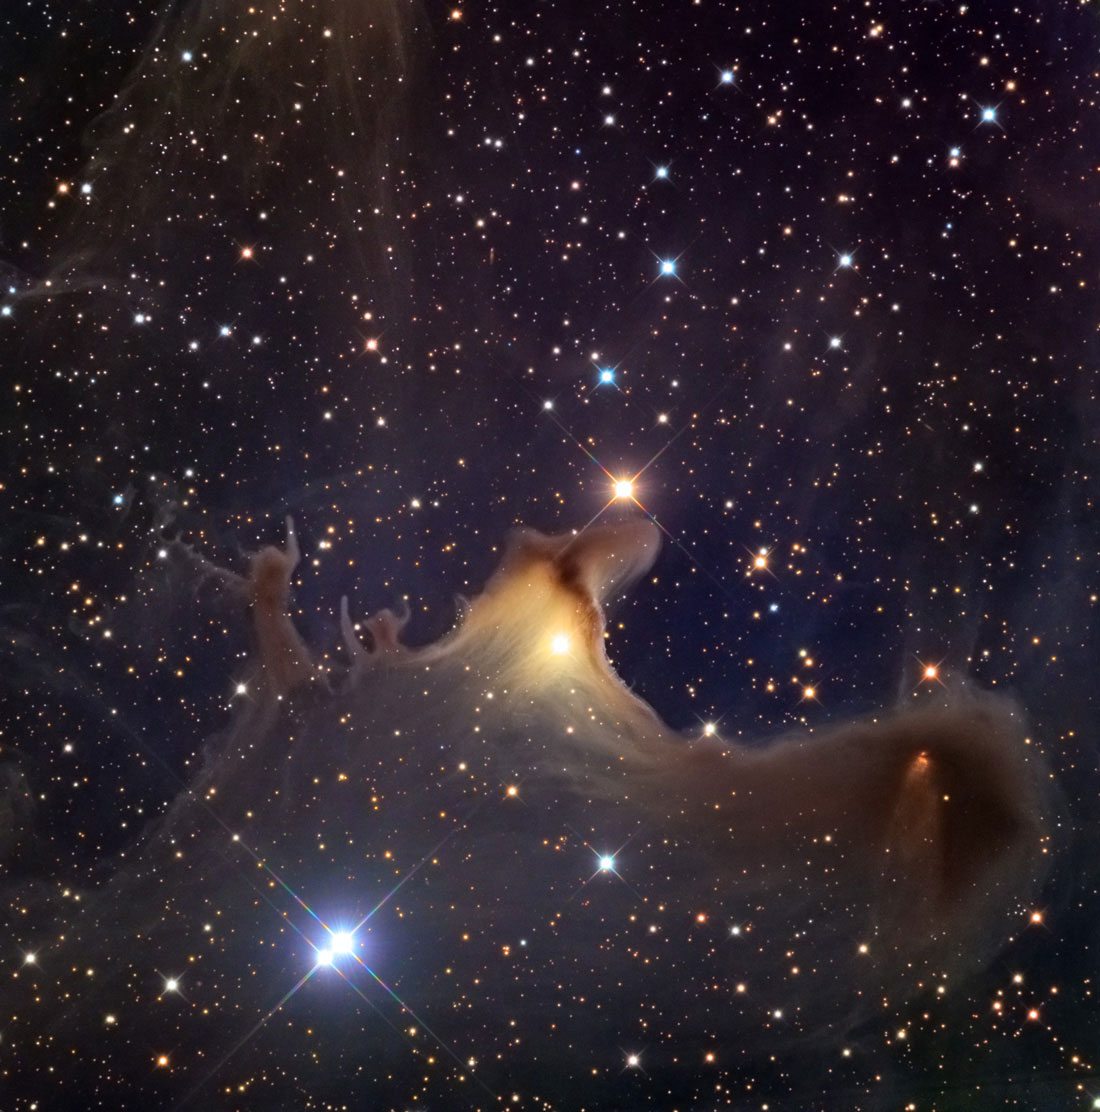 The Ghosts of Cepheus In this image of SH2-136 nebula, also known as the Ghosts of Cepheus, a few bright stars
                              illuminate an otherwise dark and cold molecular cloud of gas and dust some
                              1,200 light years away.